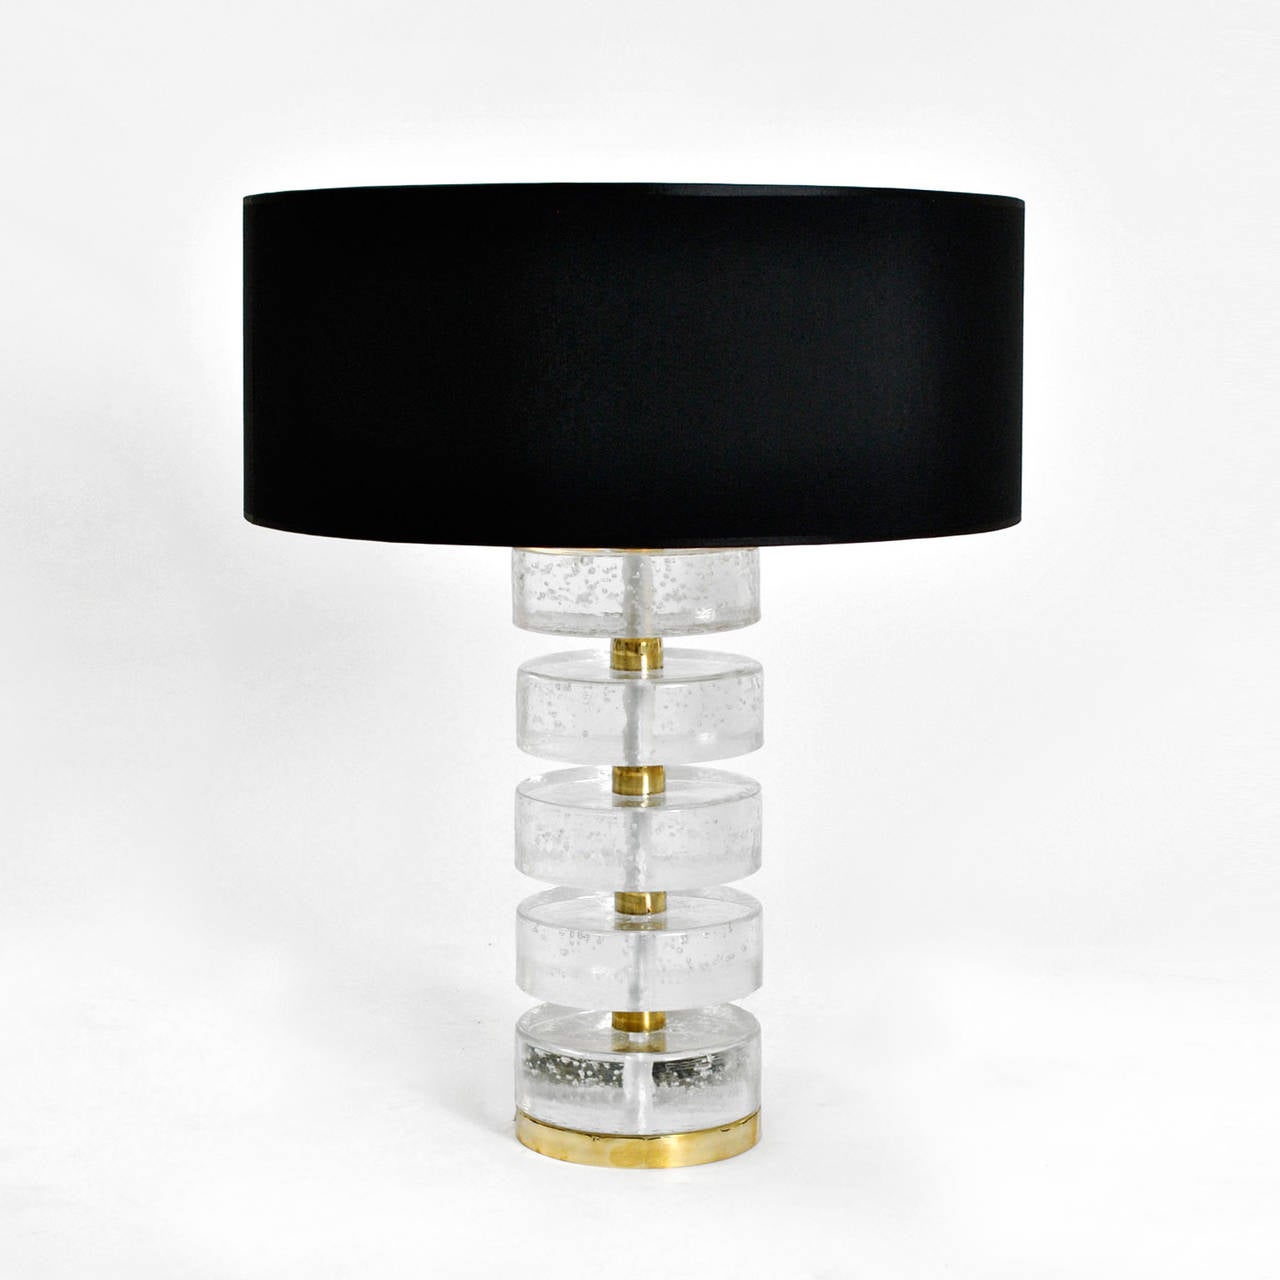 Pair of table lamps made in solid rock crystal shaped on a disk form composed by pieces of crystal and brass. Lamp shade made in black and golden 